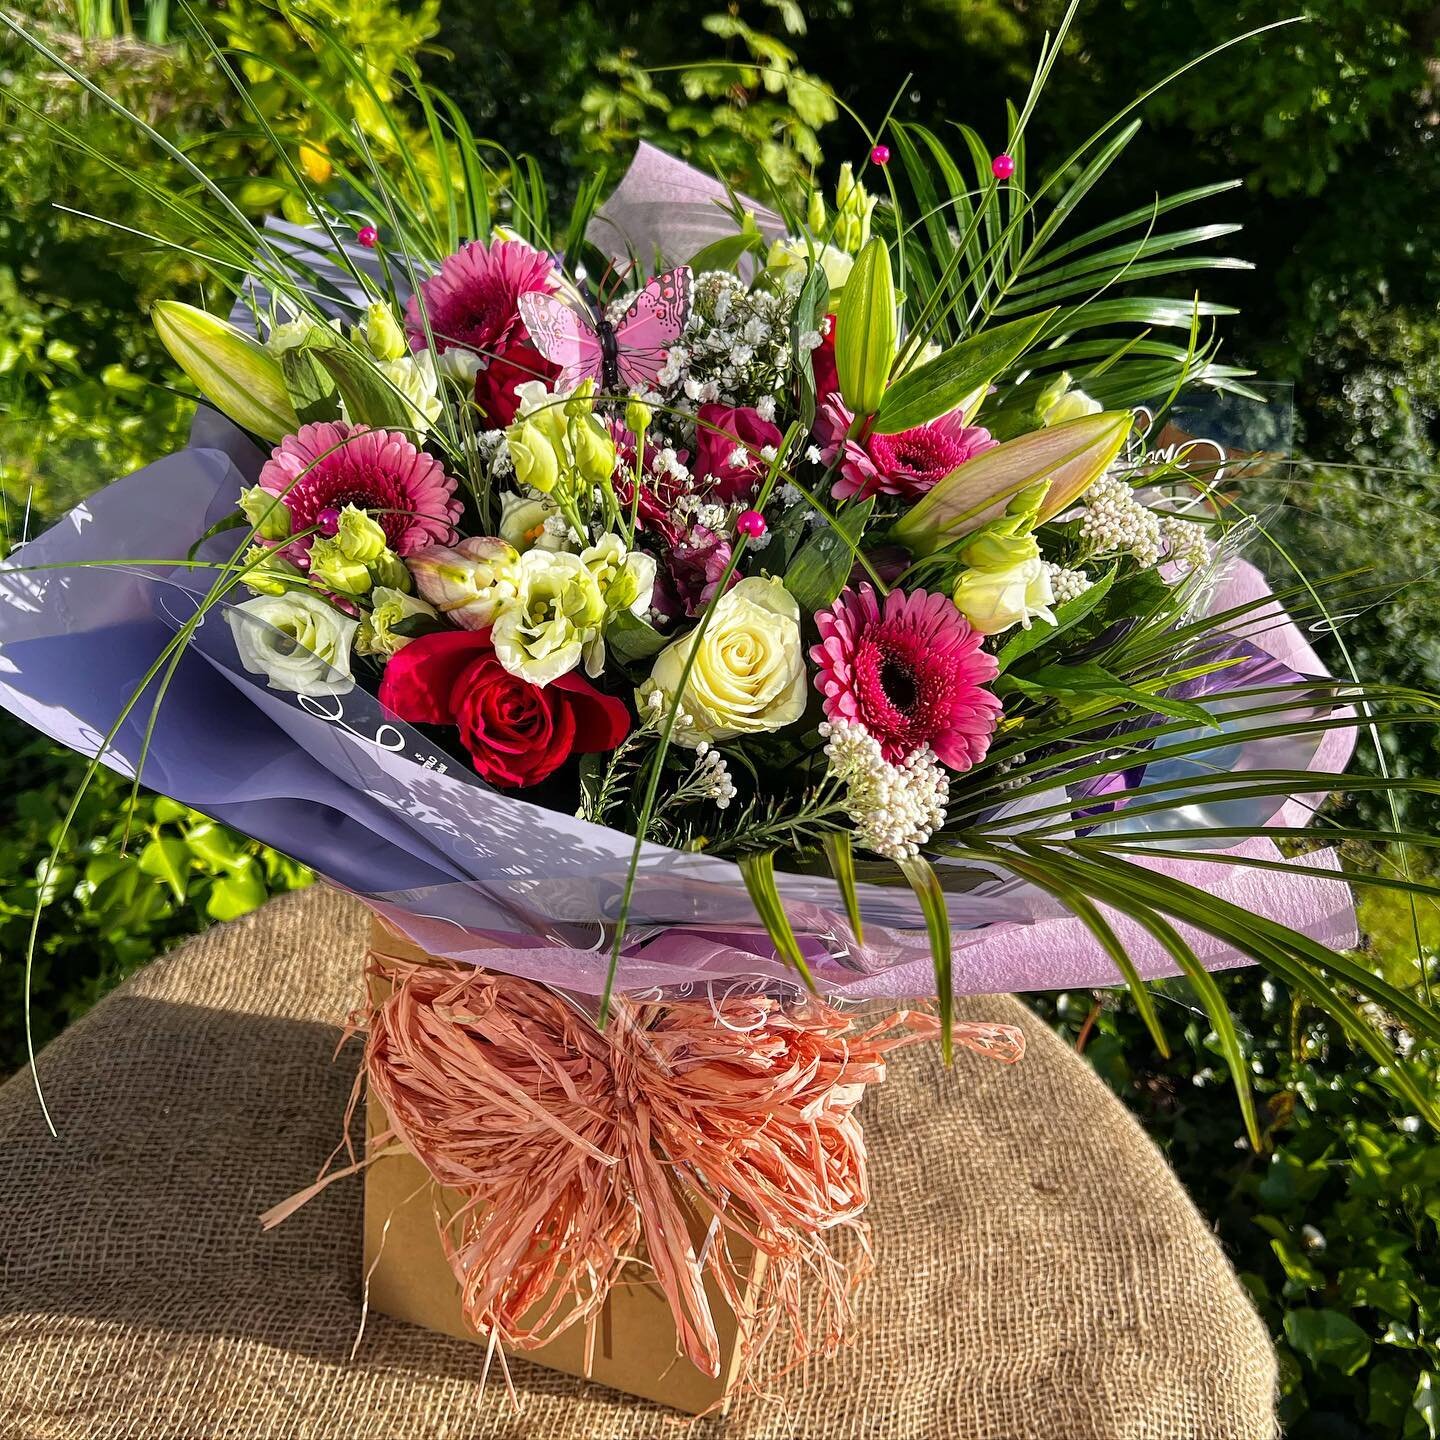 Sun is shining 🌞- flowers are shining 💐 

Flowers for every occasion with FREE local delivery. DM to order 
.
.
.

#floirstnearme #denbigshireflorist #floristnorthwales #floralinstallation #floralinspiration #flowerdelivery #flowerdeliverynorthwale